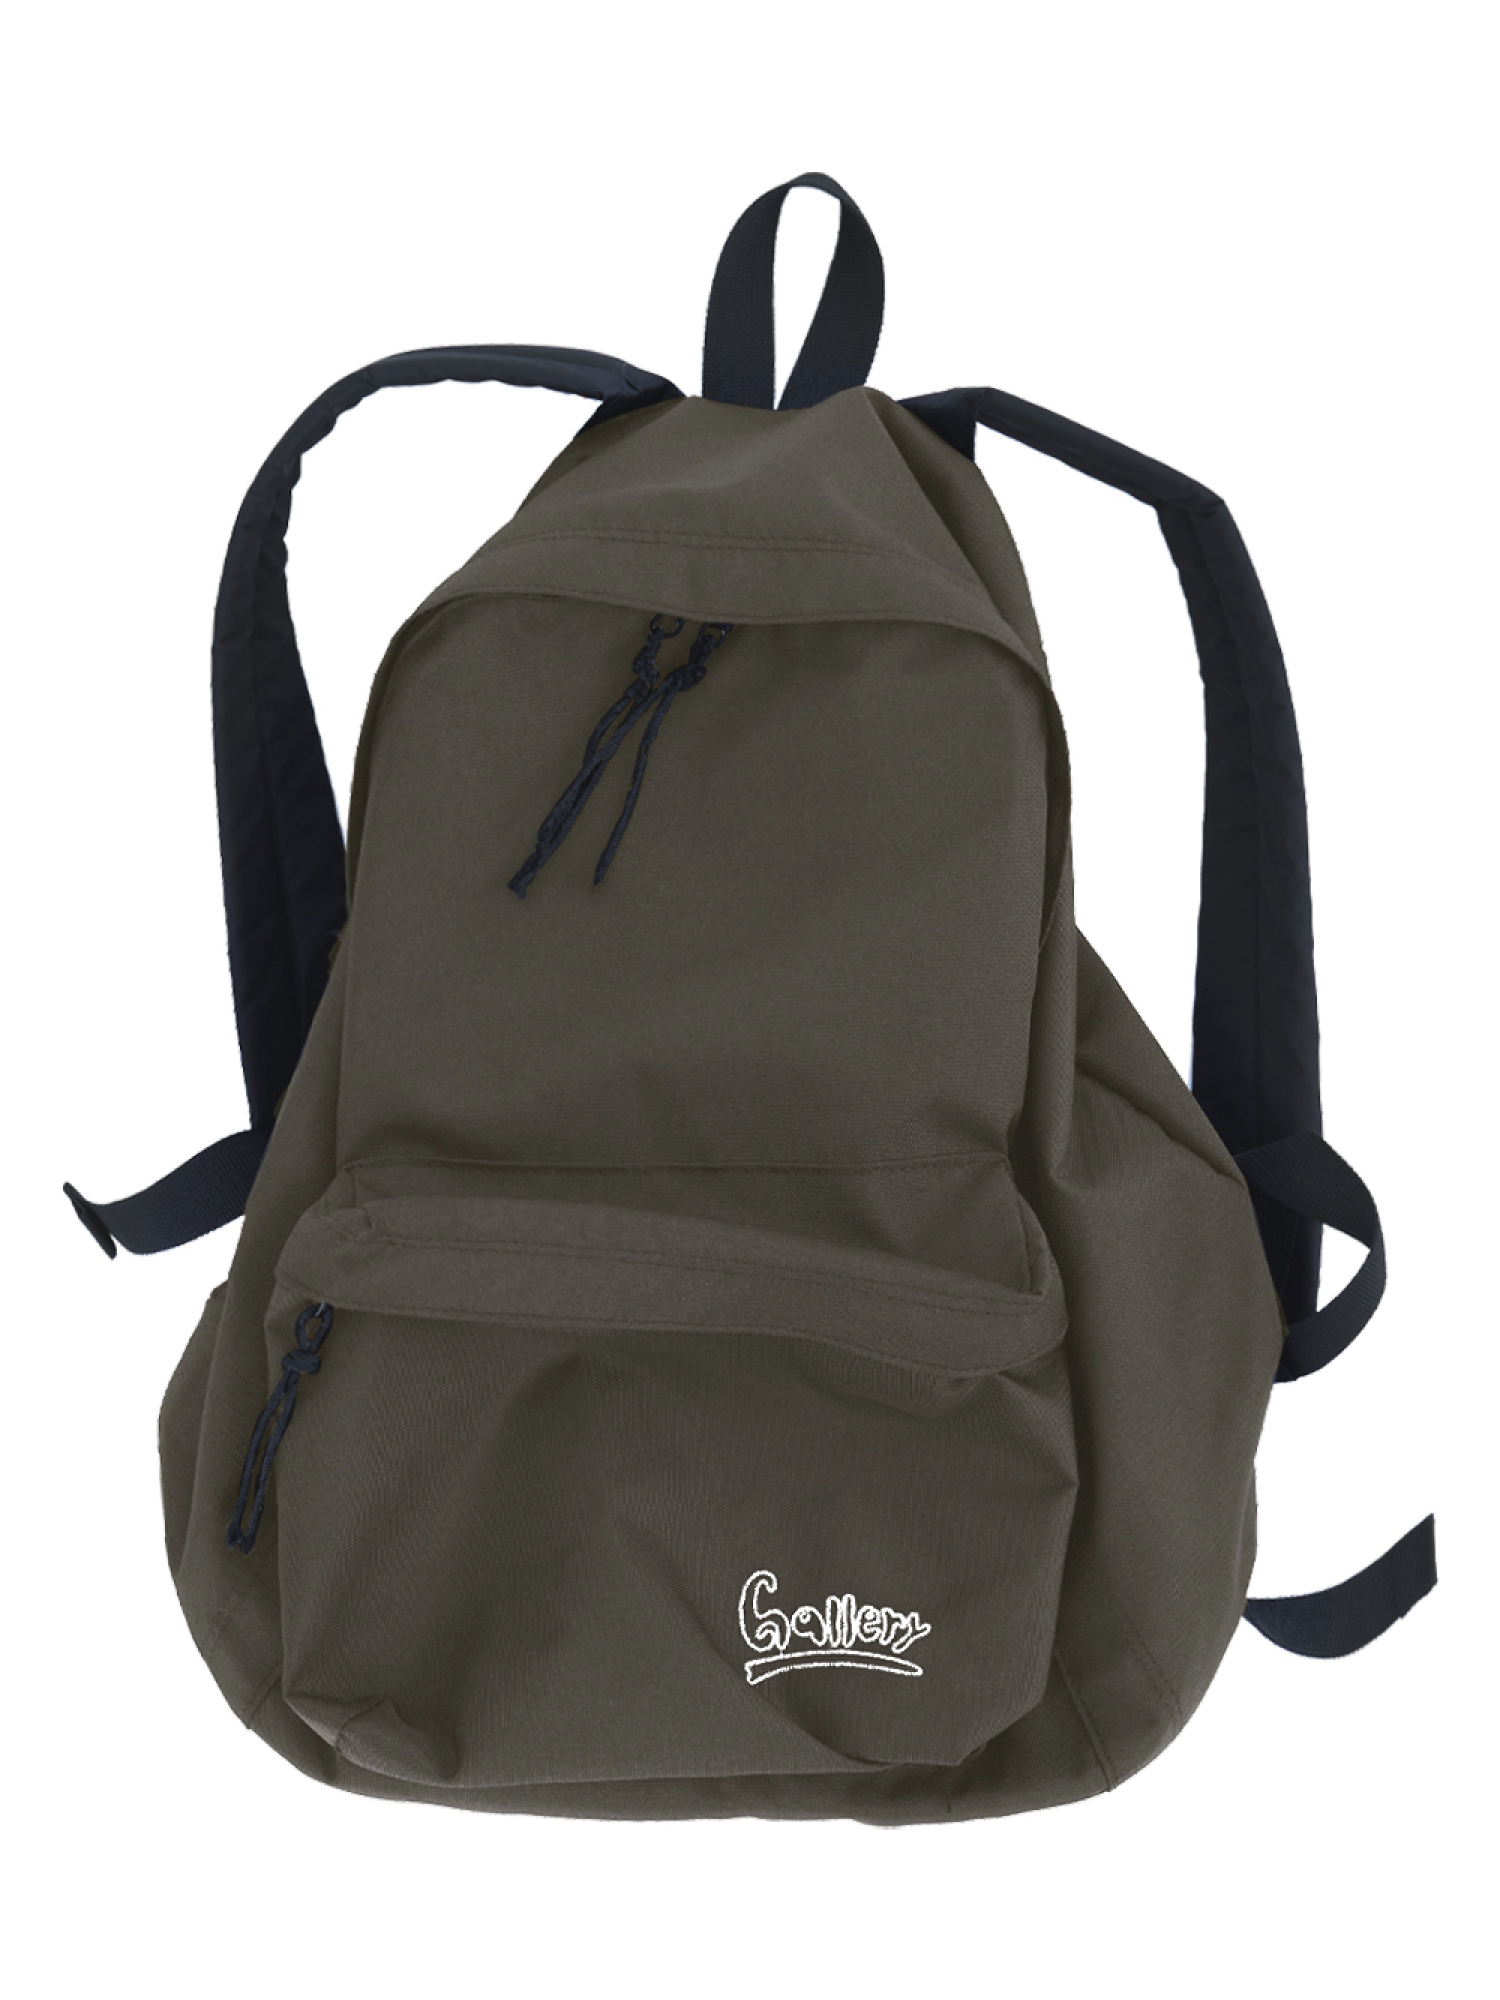 Gallery Embroidery DayPack - Khaki